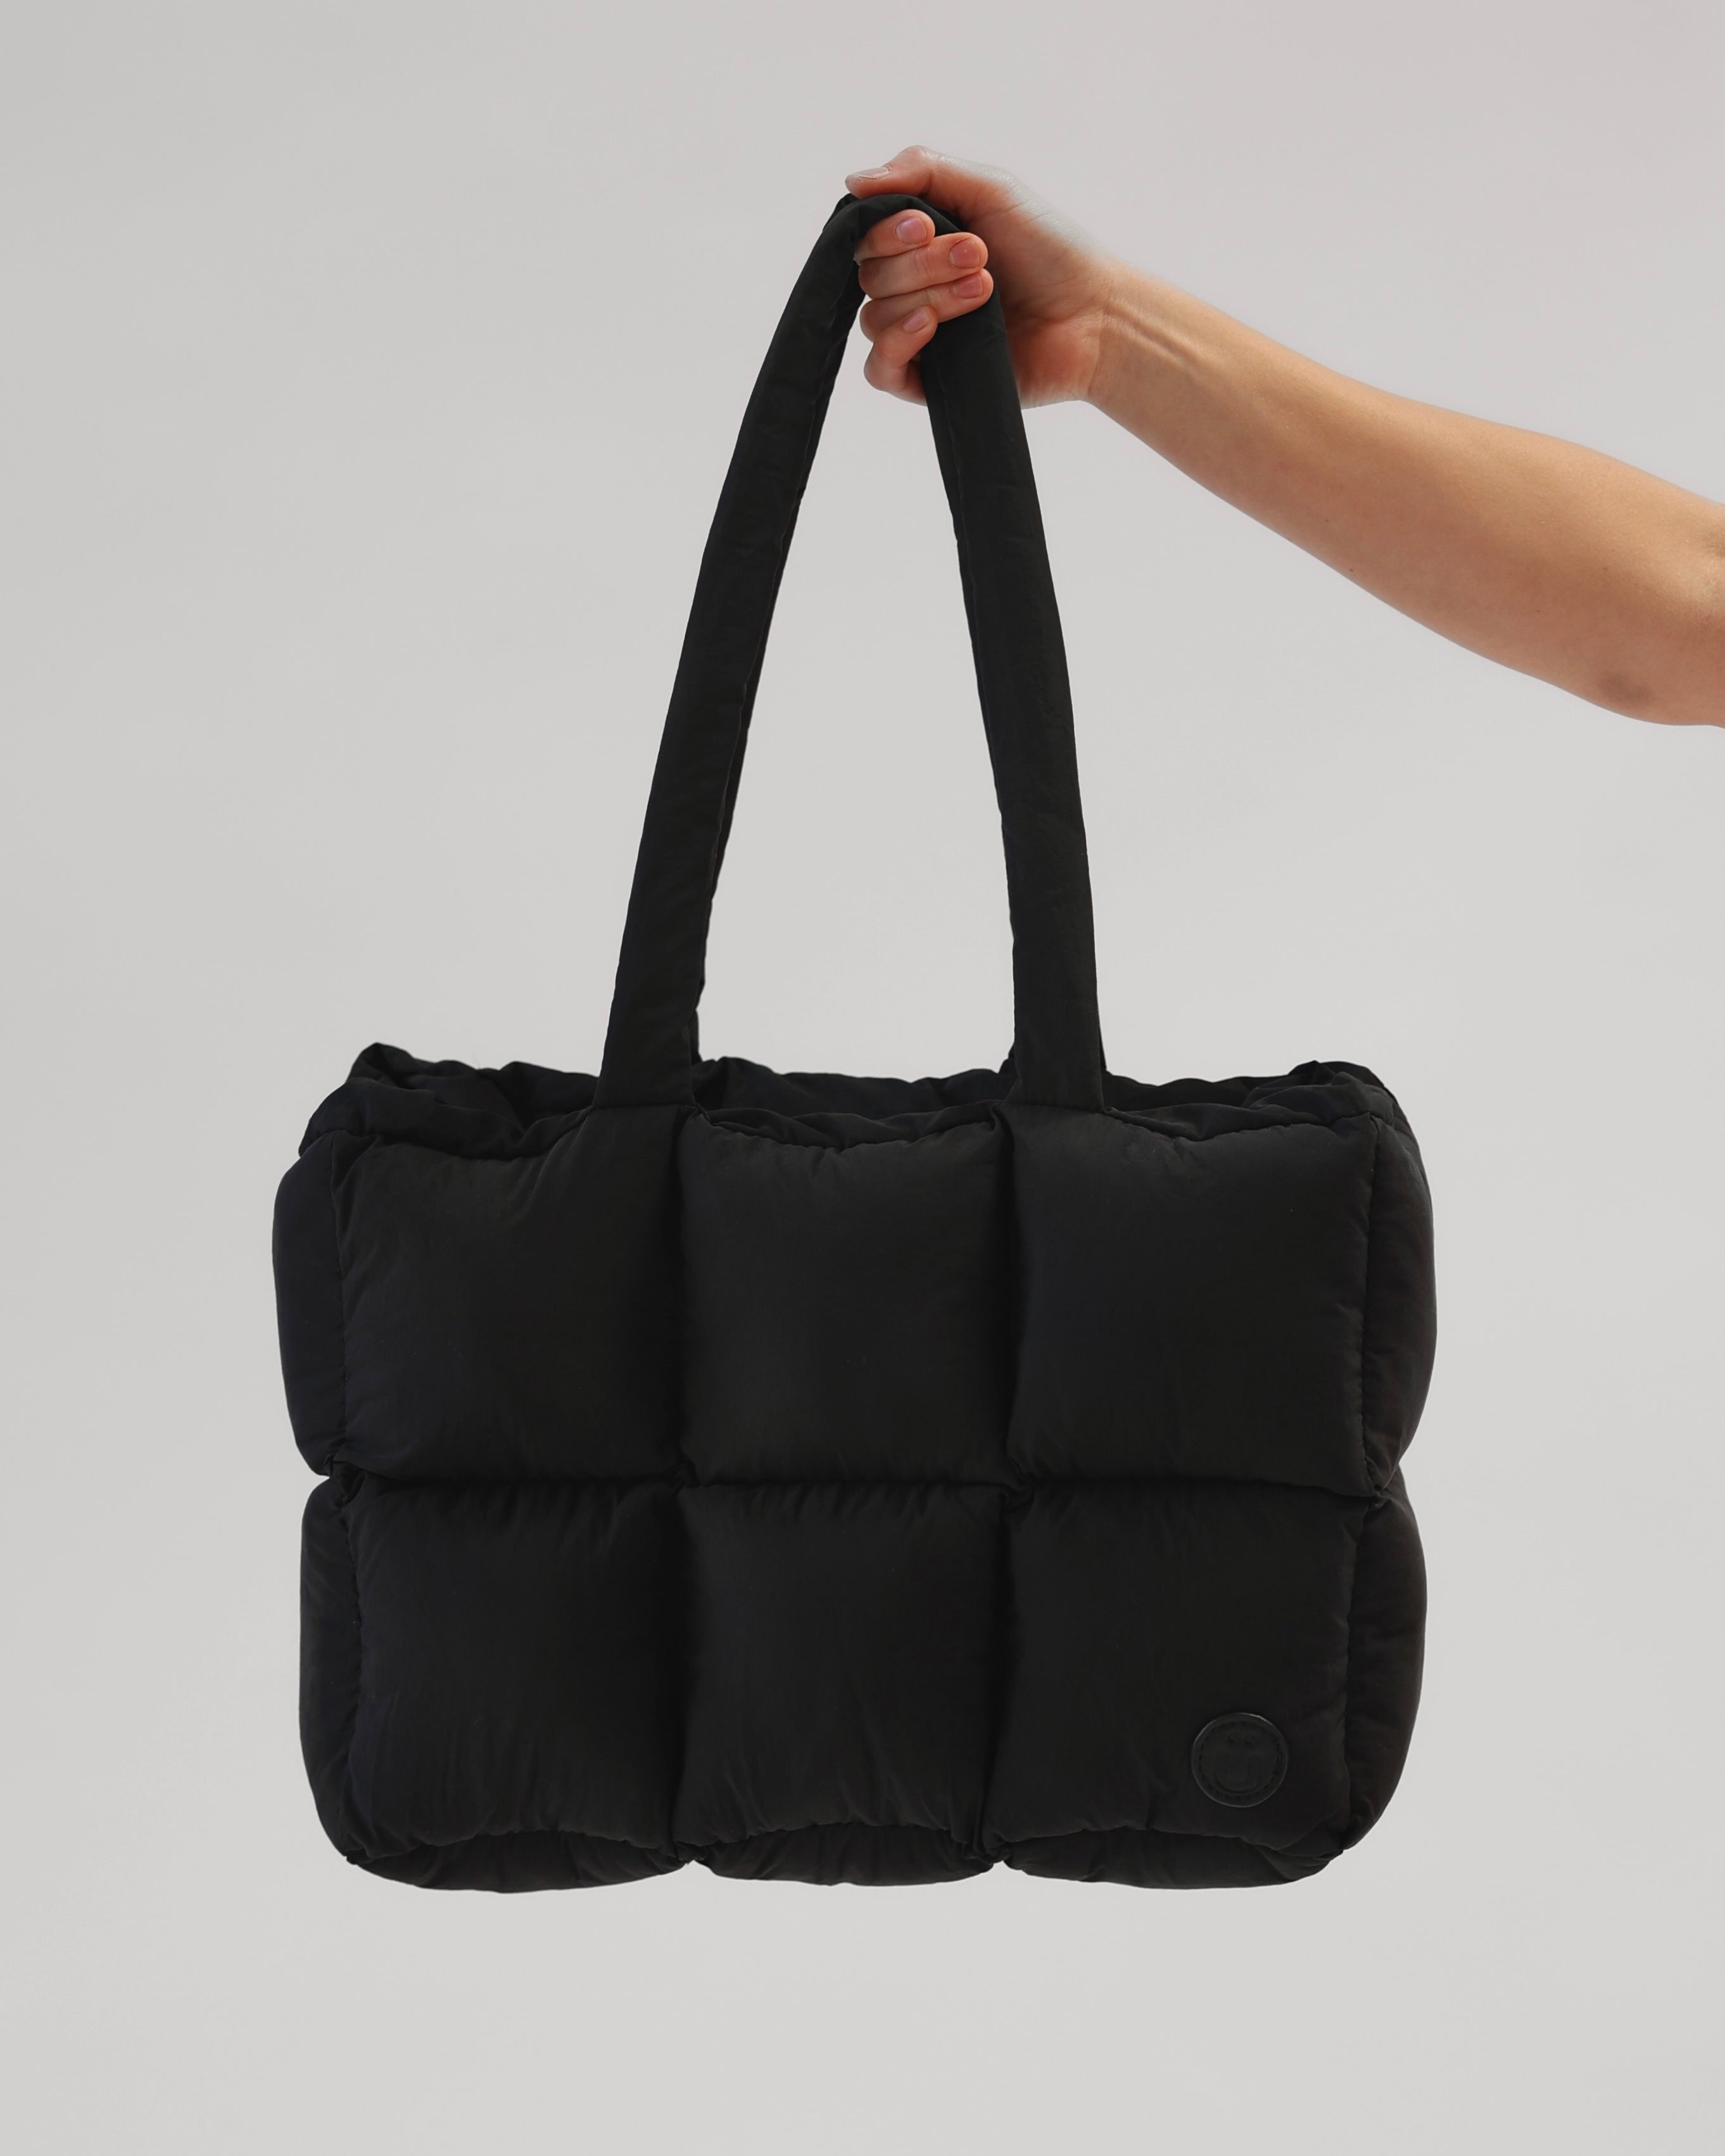 'Every Day Bag' Black